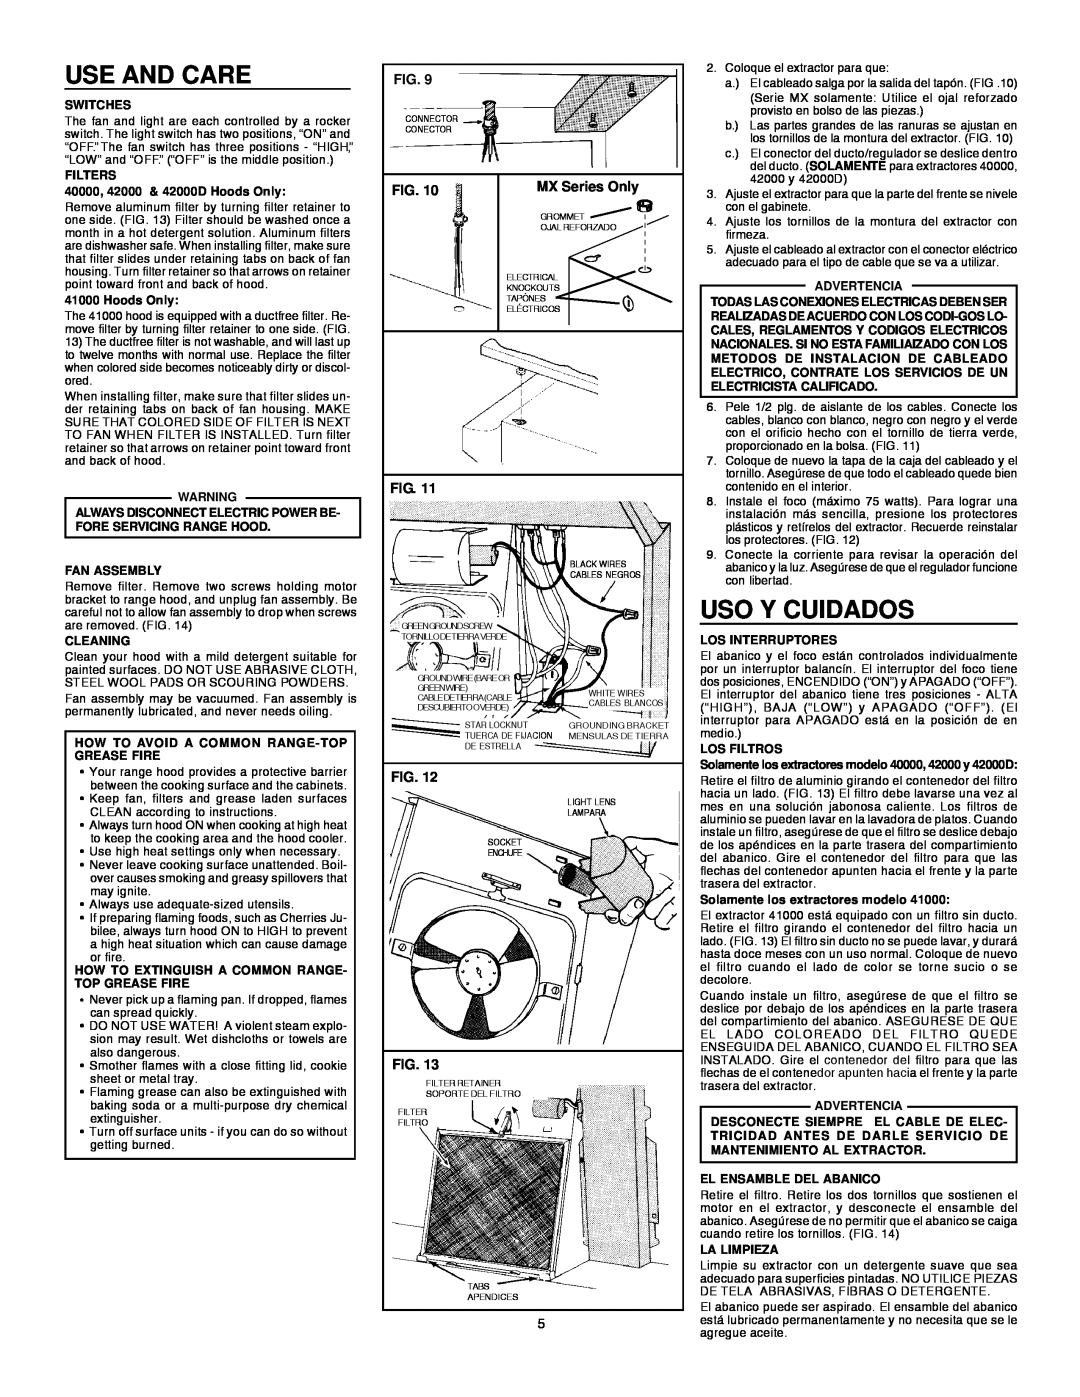 Broan 413623 installation instructions Use And Care, Uso Y Cuidados, MX Series Only 